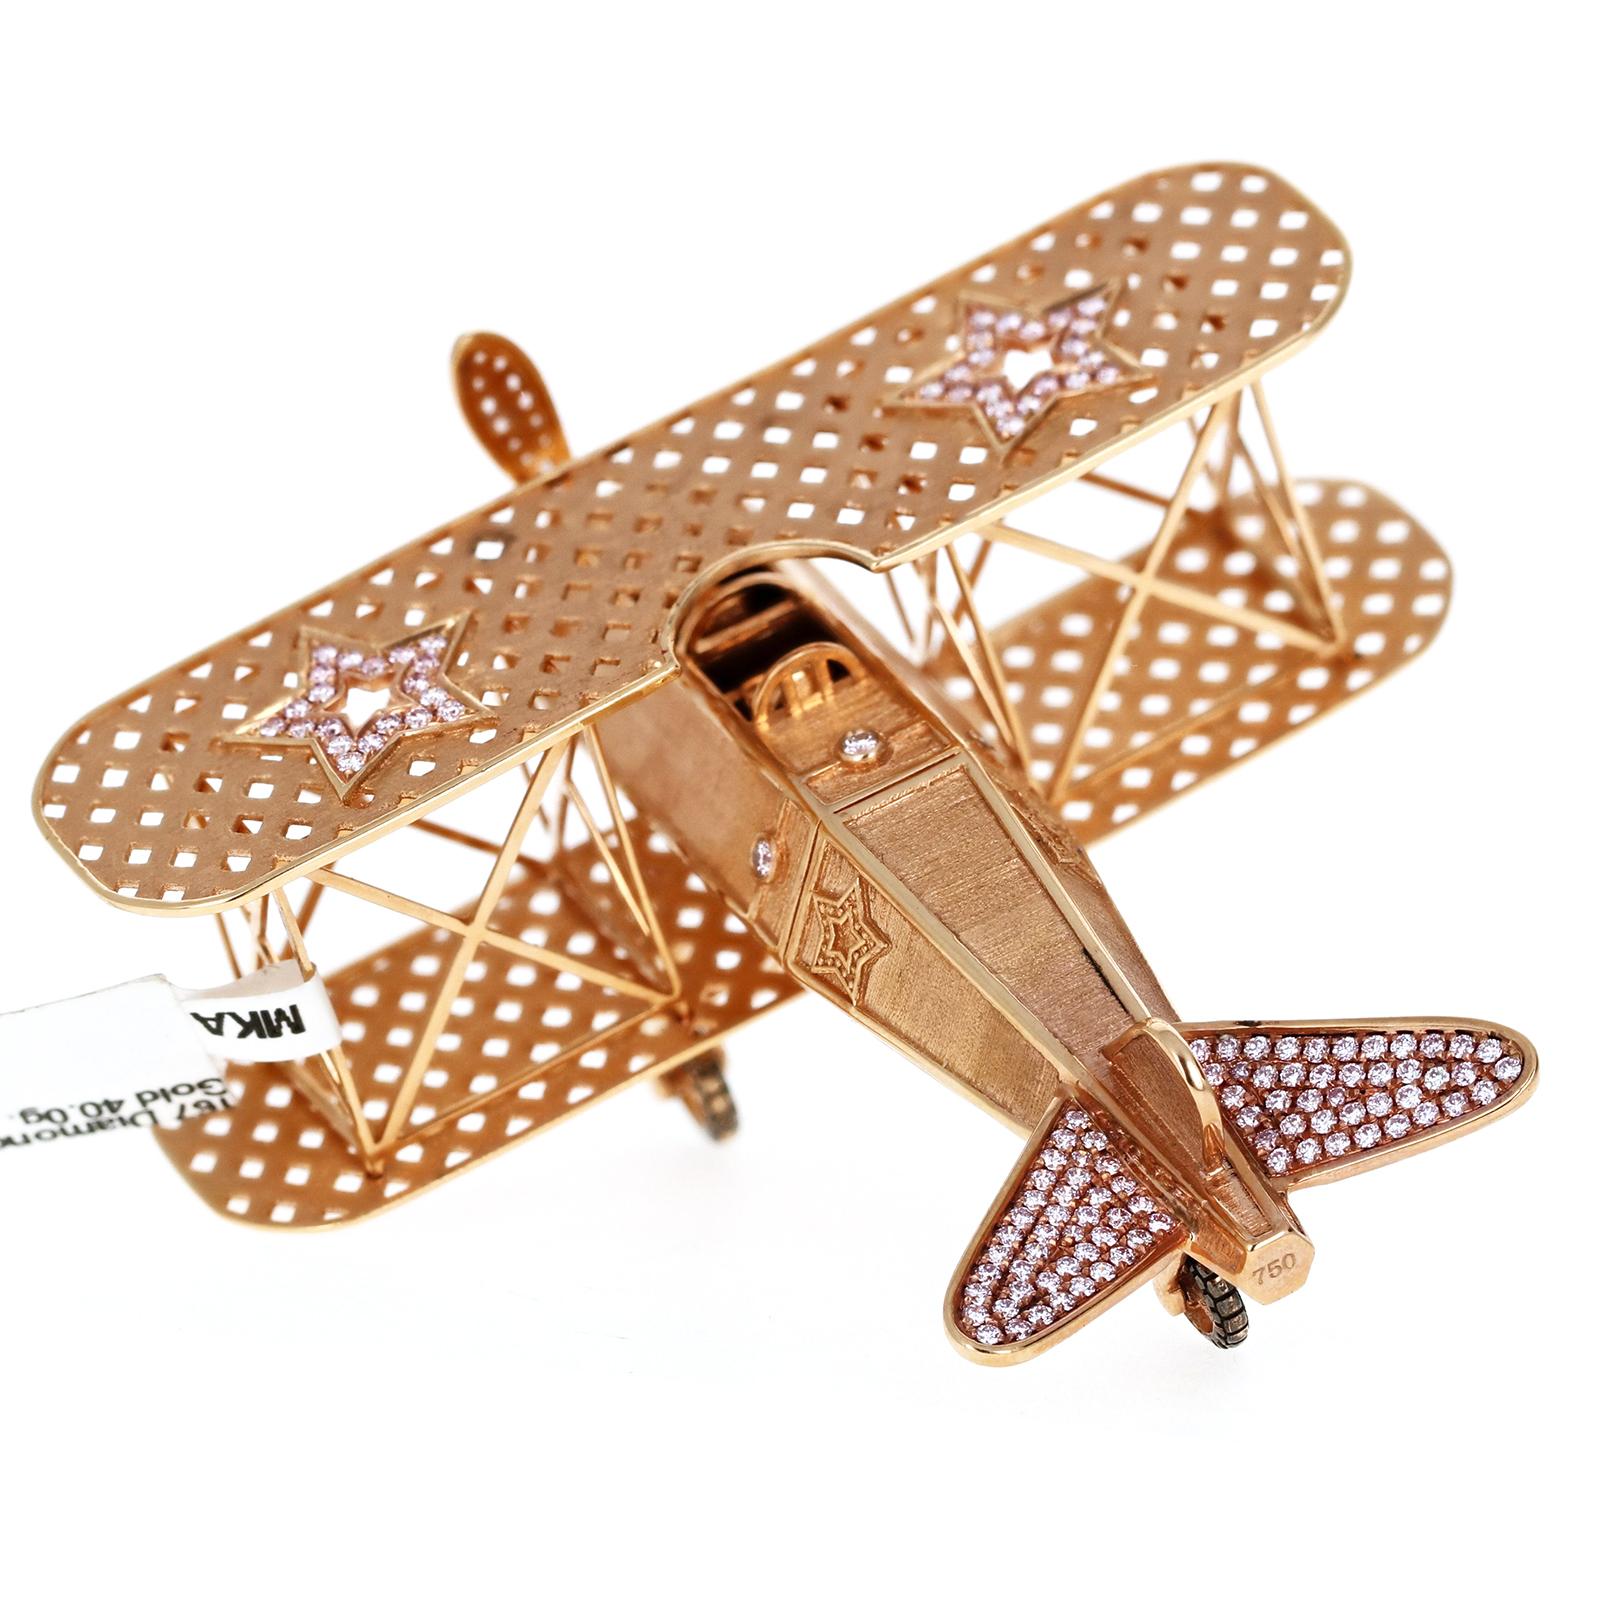 A one-of-a-kind, unique collector's piece made of solid 18-karat rose gold, natural argyle pink diamonds, black diamonds with a propeller that spins, and wheels that move.
A very skilled jeweler crafted this magnificently hand-made model plane. The